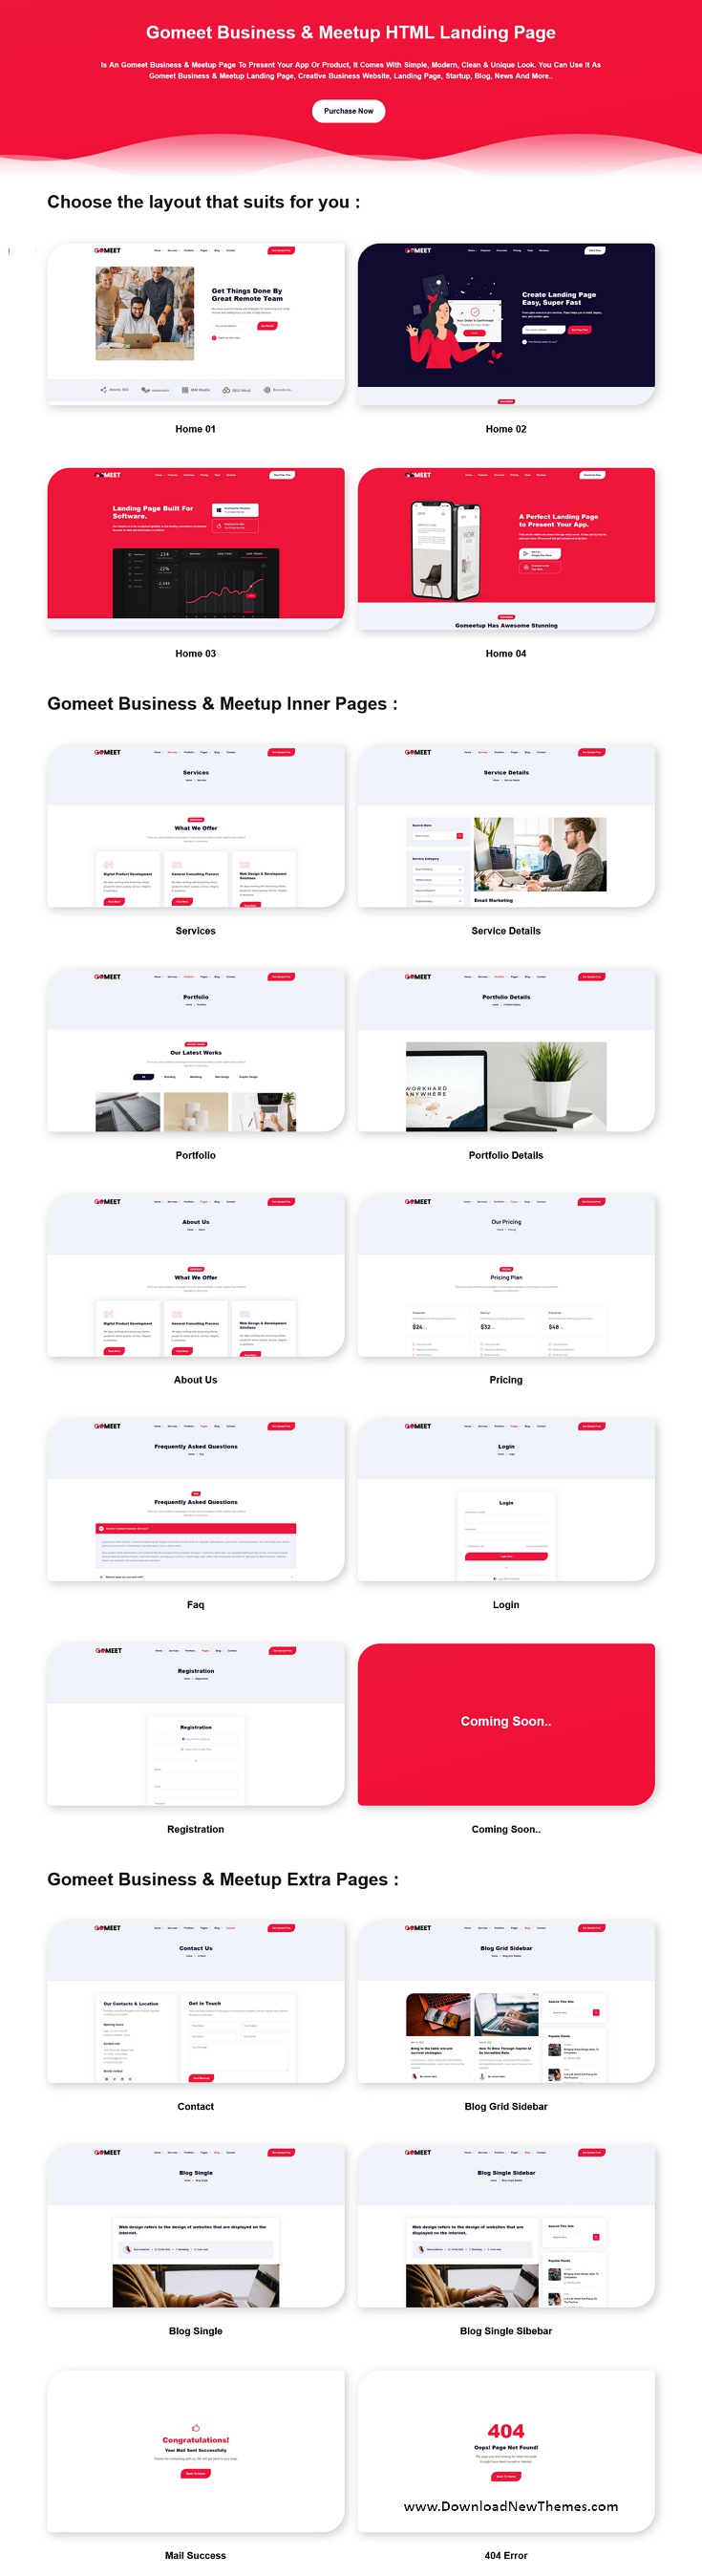 Gomeet Business & Meetup HTML Landing Page Template Review